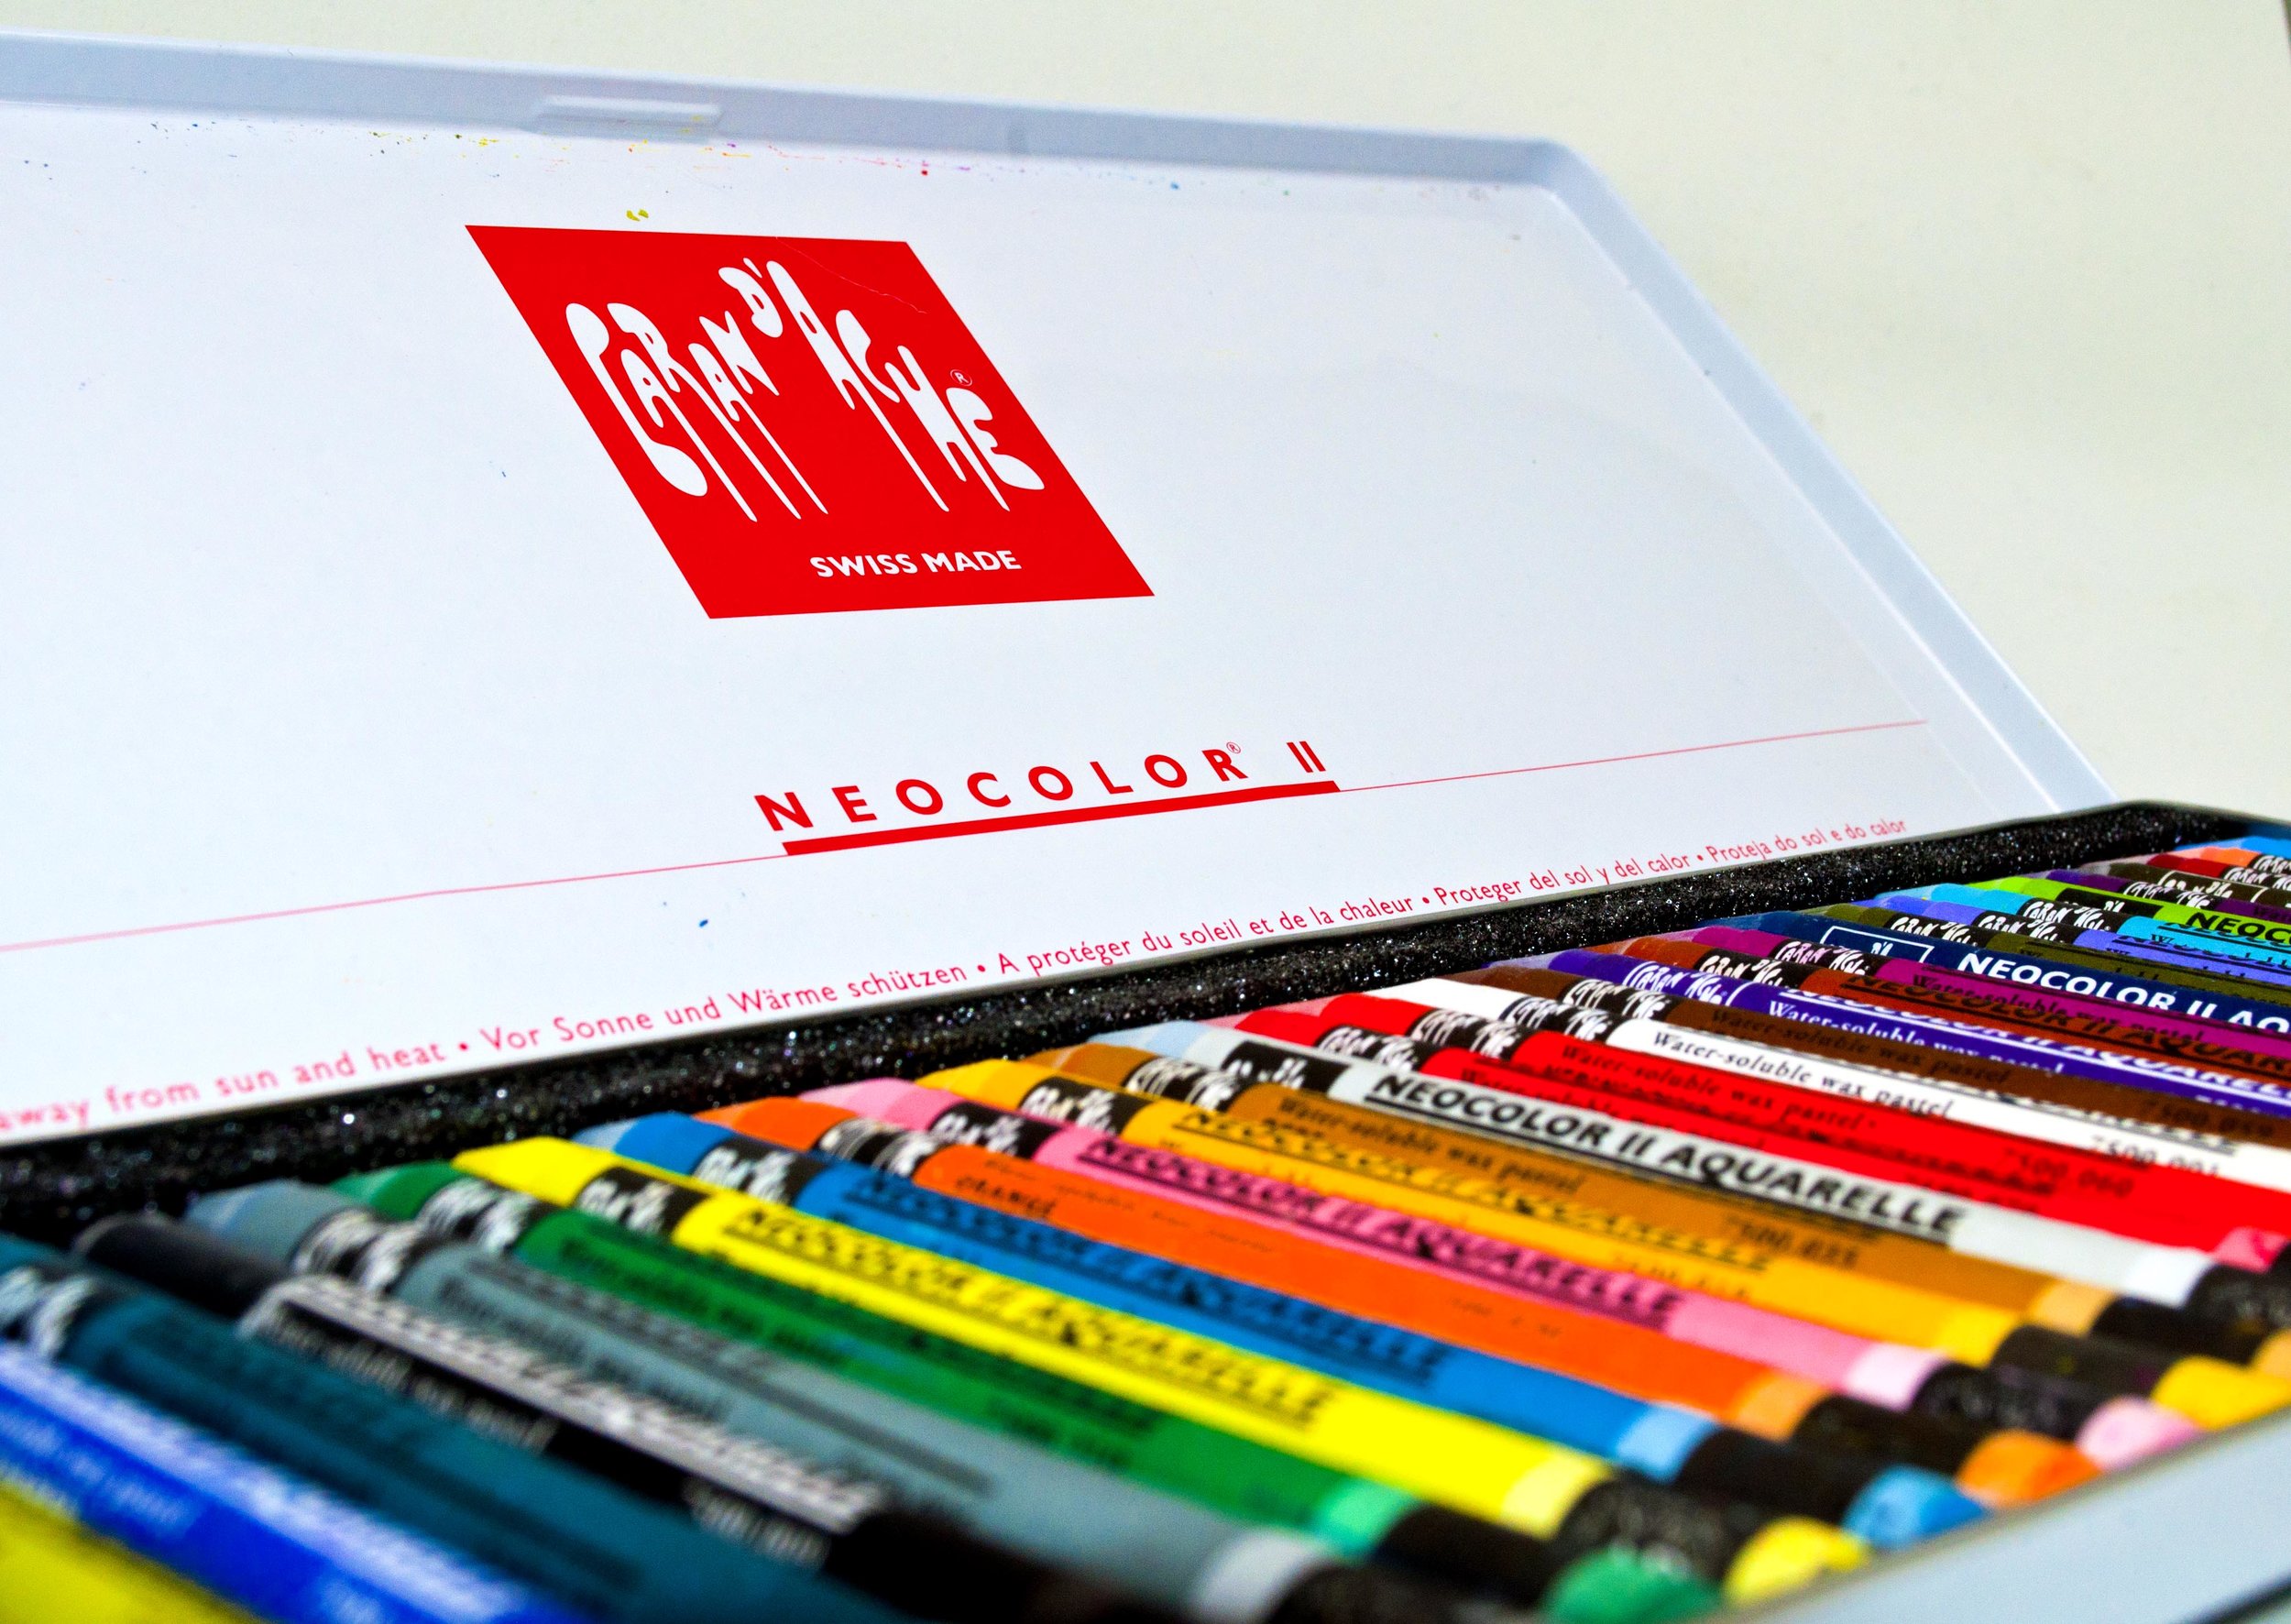 REVIEW: Caran d'Ache Neocolor II! Are These the Art Supply Unicorn